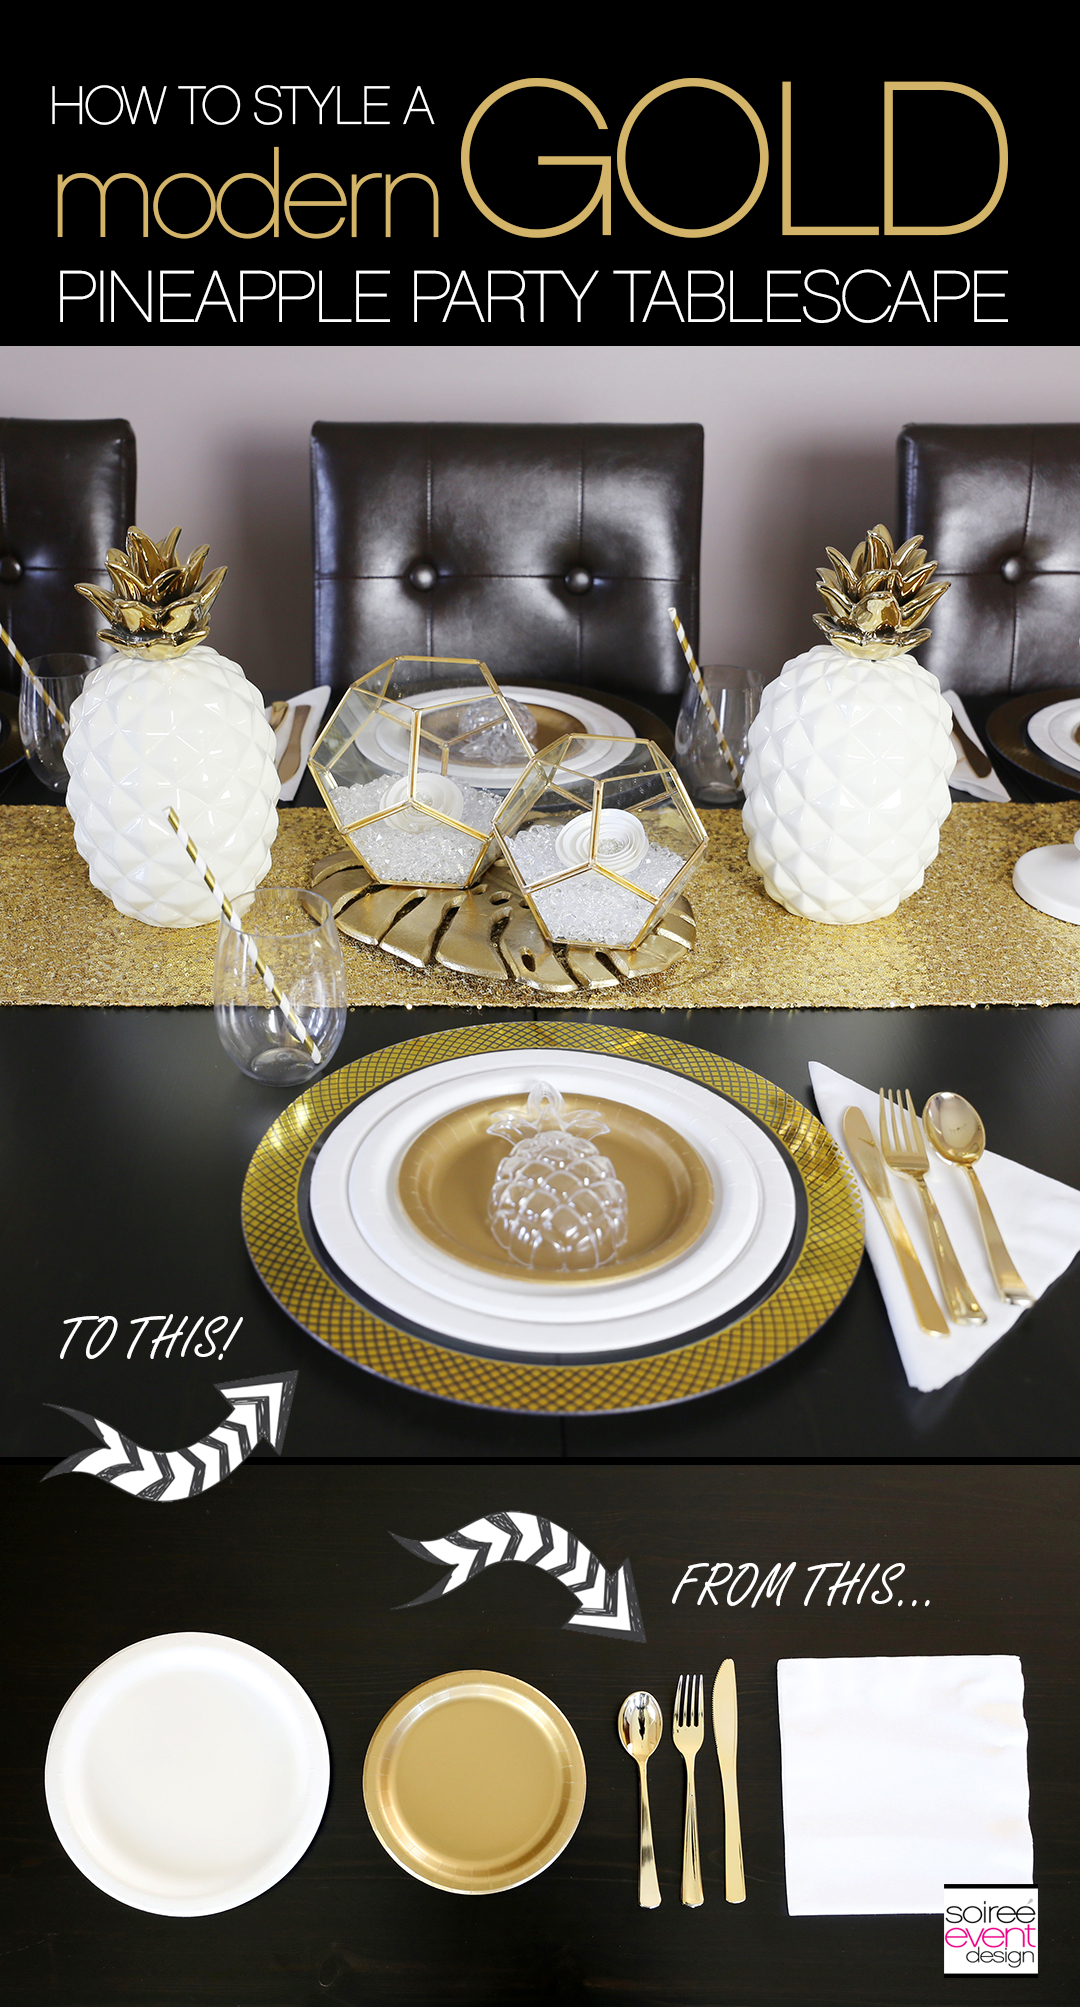 How to Style a Modern Gold Pineapple Party Tablescape